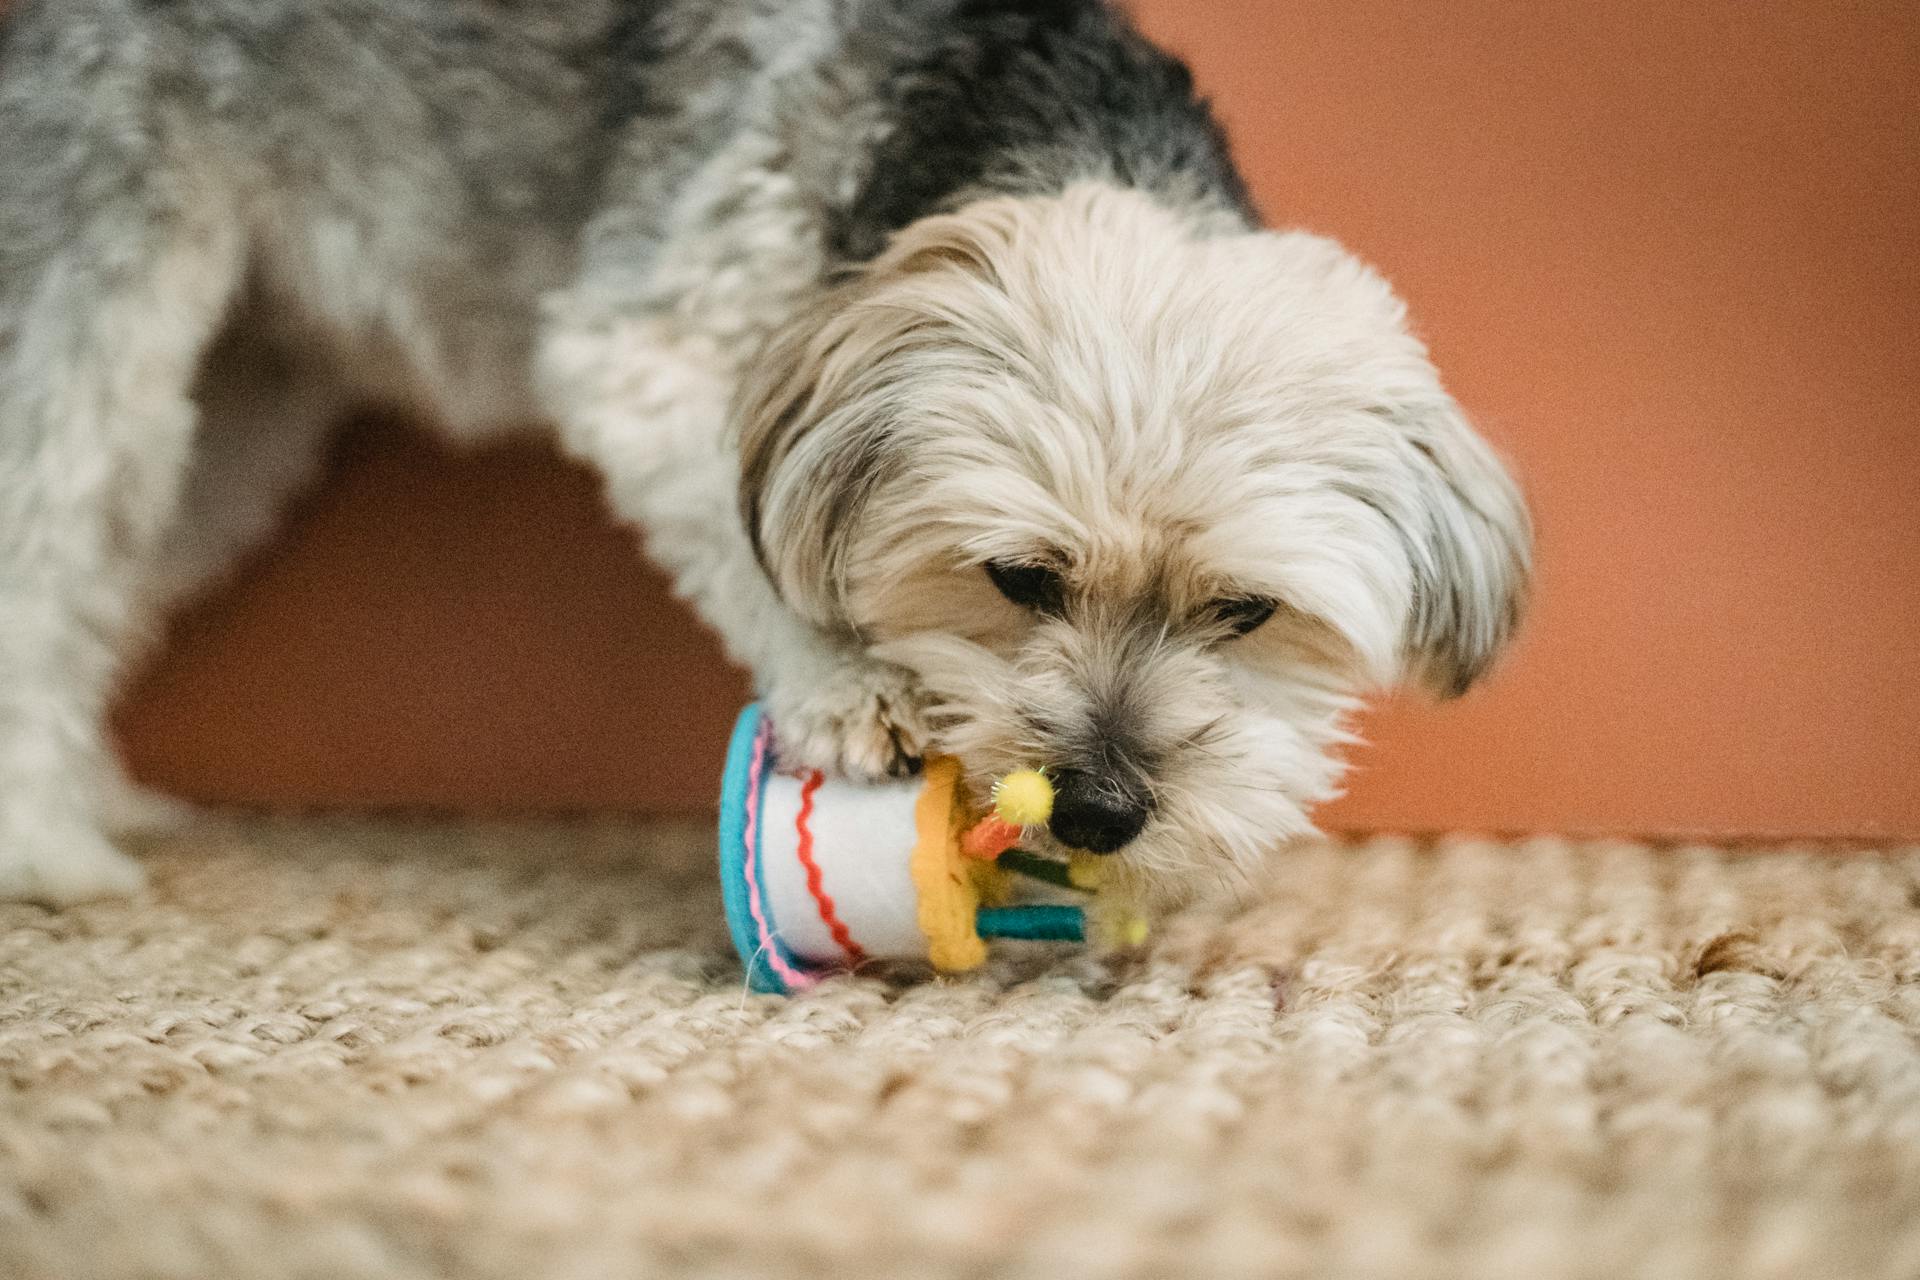 A dog playing with a birthday cake-shaped chew toy